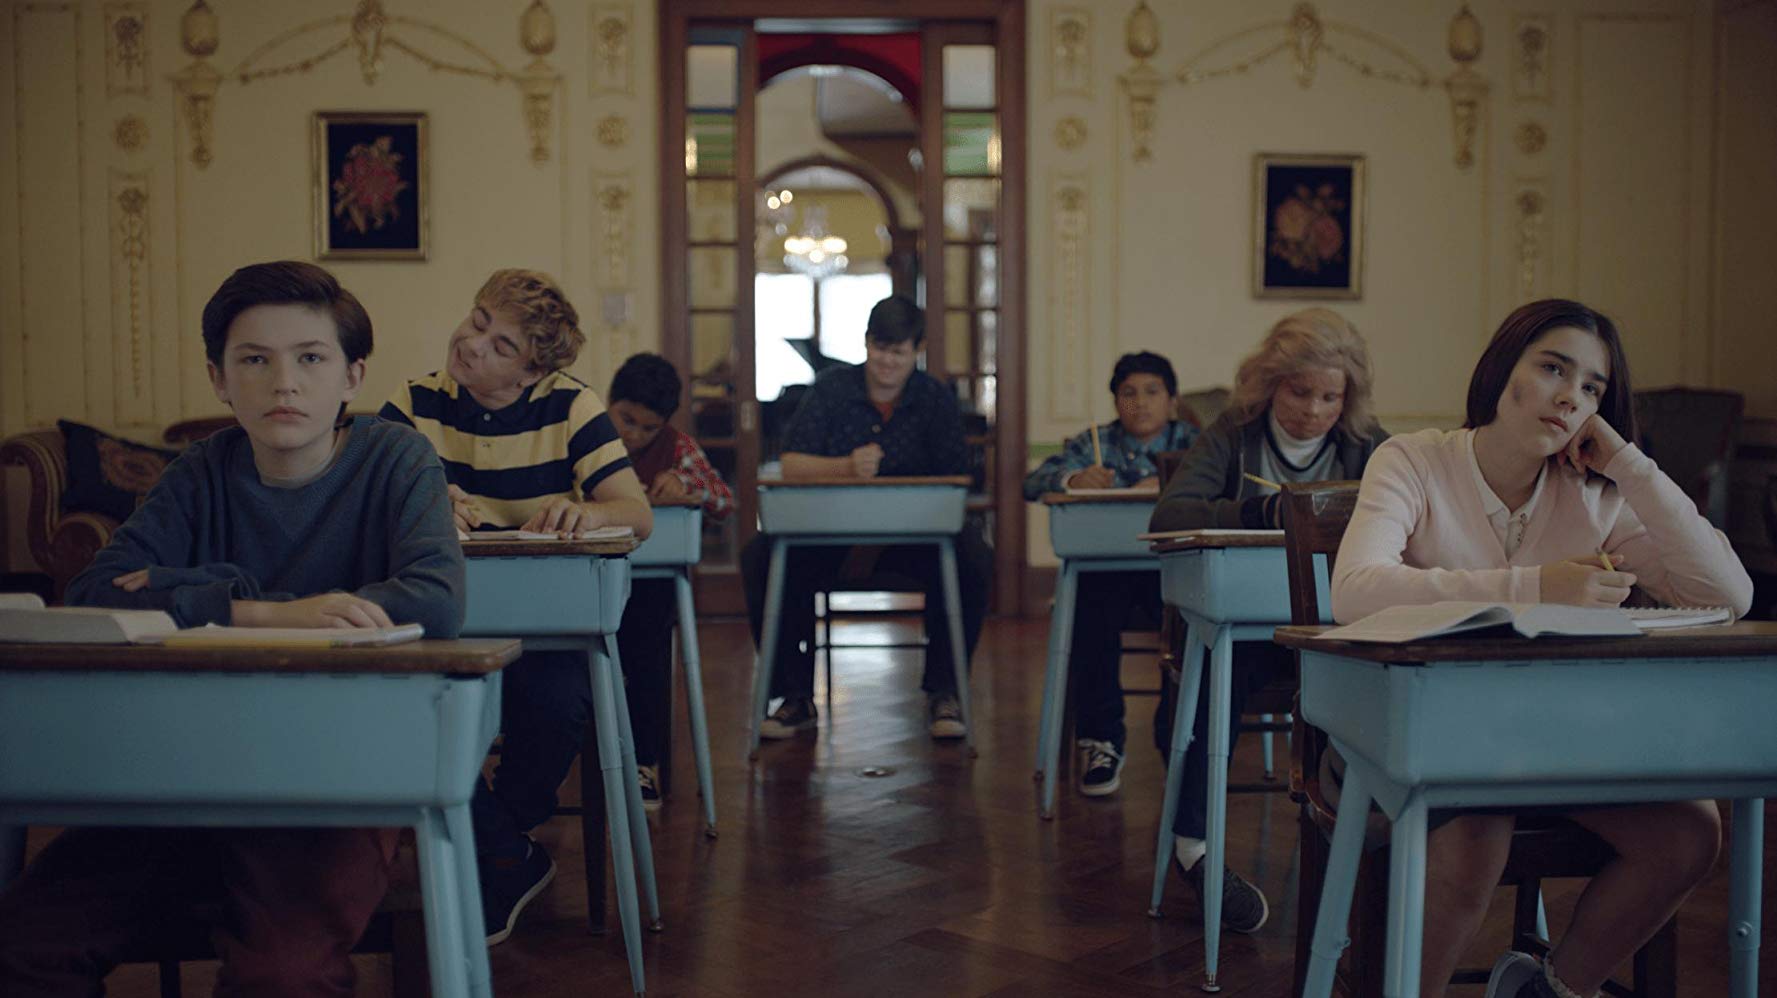 Students sitting in desk-chair combos looking forward and slightly bored. To the left is a boy with pale skin and long-ish brown hair (Jacob), to the right is a pale girl with long brown hair with her chin resting on her fist (Isabel). The desks are blue and the walls are yellow wallpaper with a Victorian-looking pattern on them.